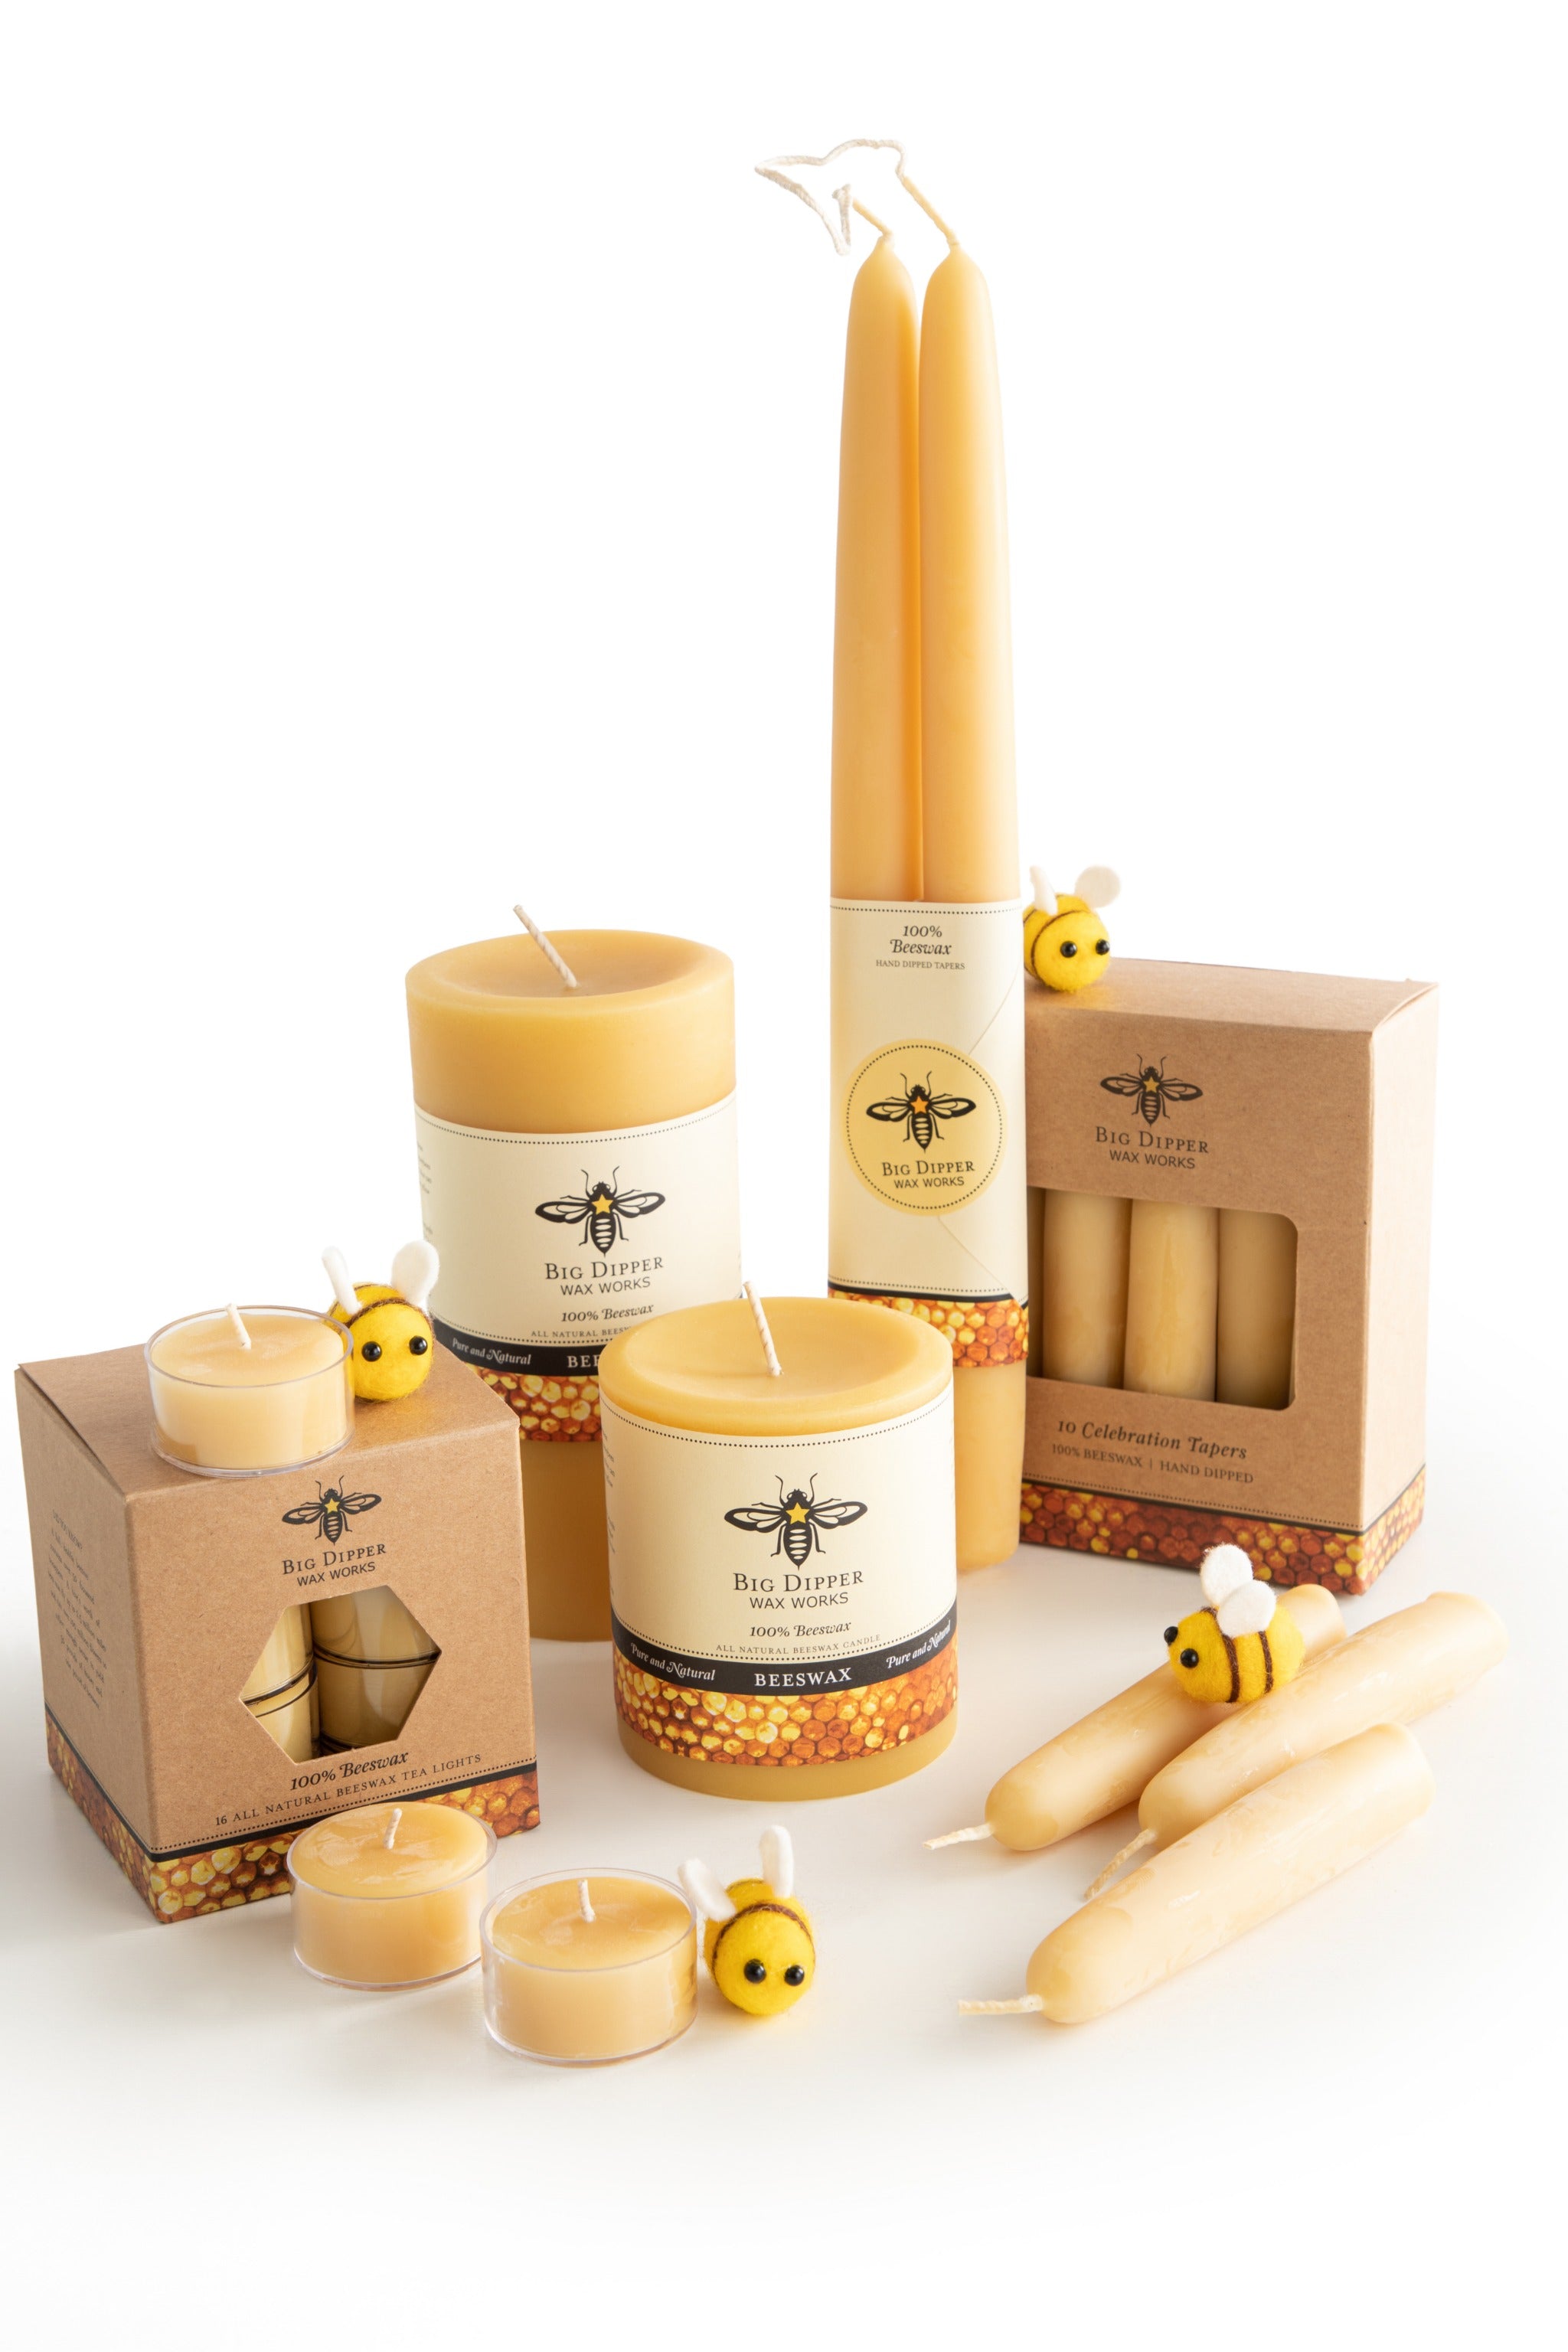 Big Dipper Wax Works Tapers, Hand Dipped, Natural - 2 candles